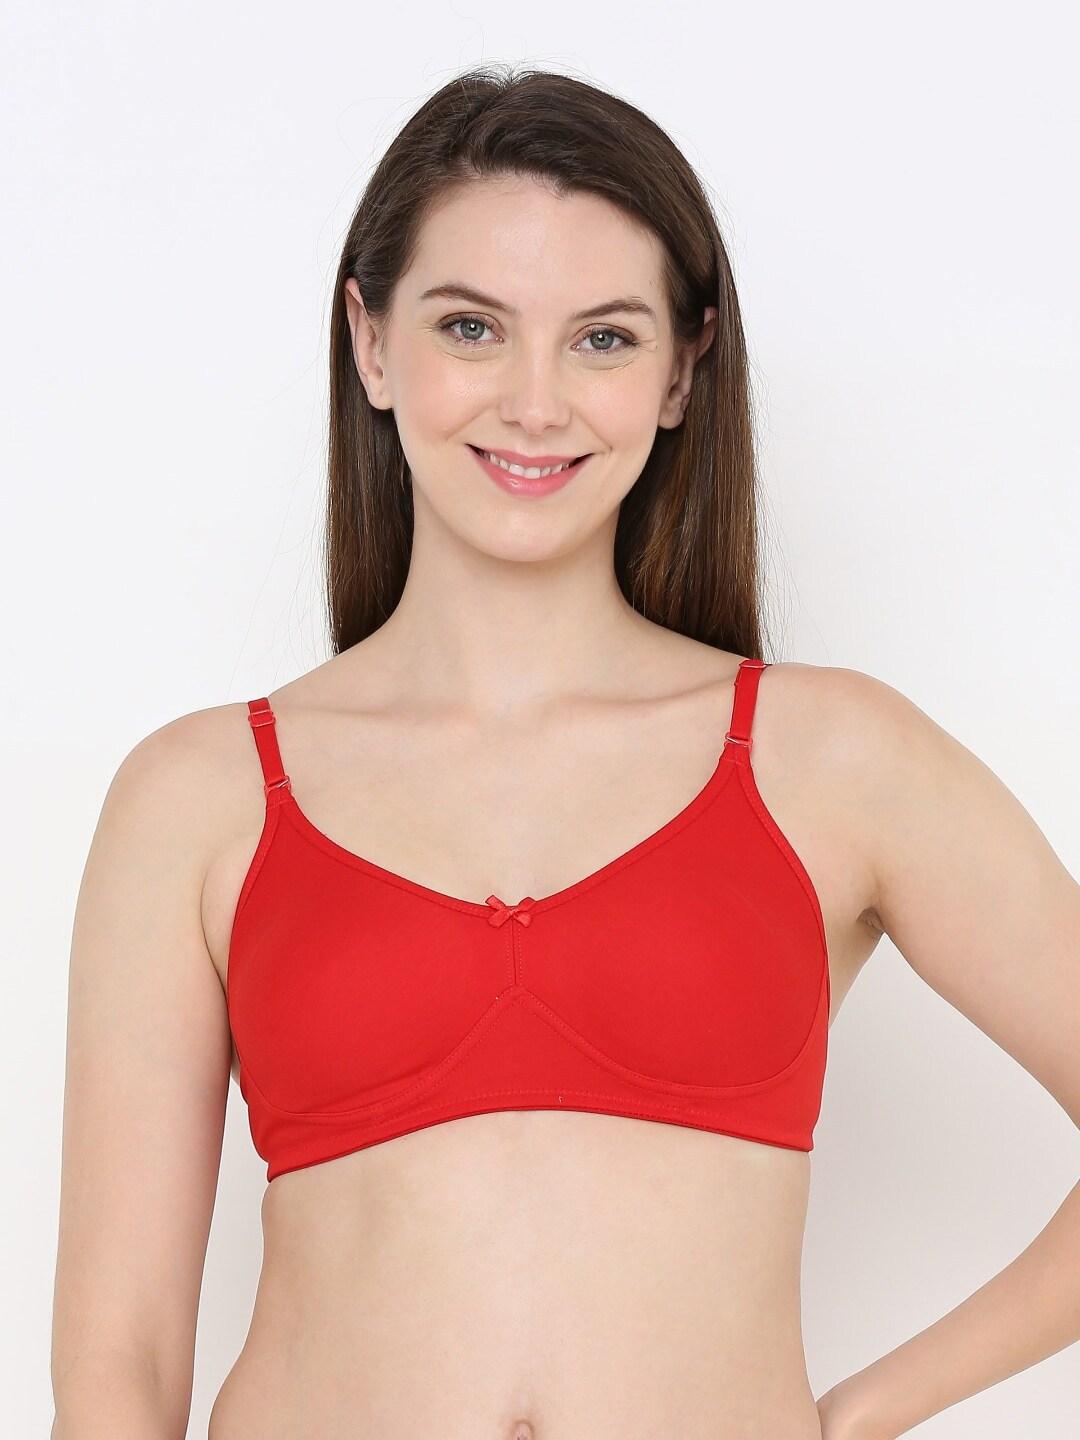 Berrys Intimatess Non-Wired & Non Padded All Day Comfort Full Coverage Seamless Bra